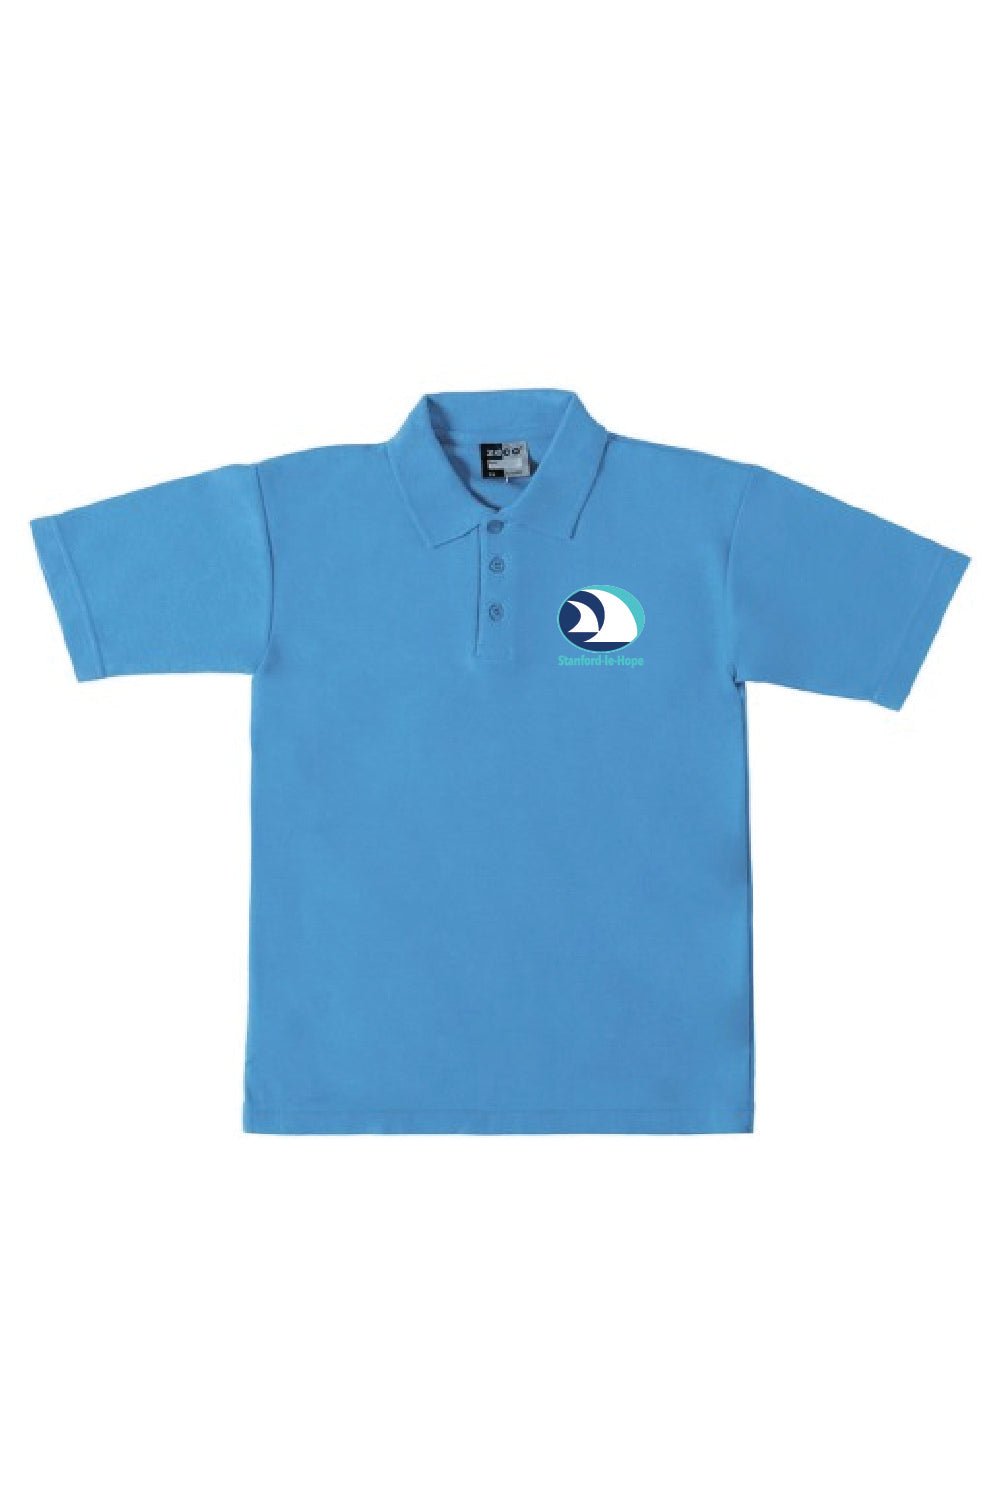 Stanford-Le-Hope Blue Polo Shirt - Uniformwise Schoolwear